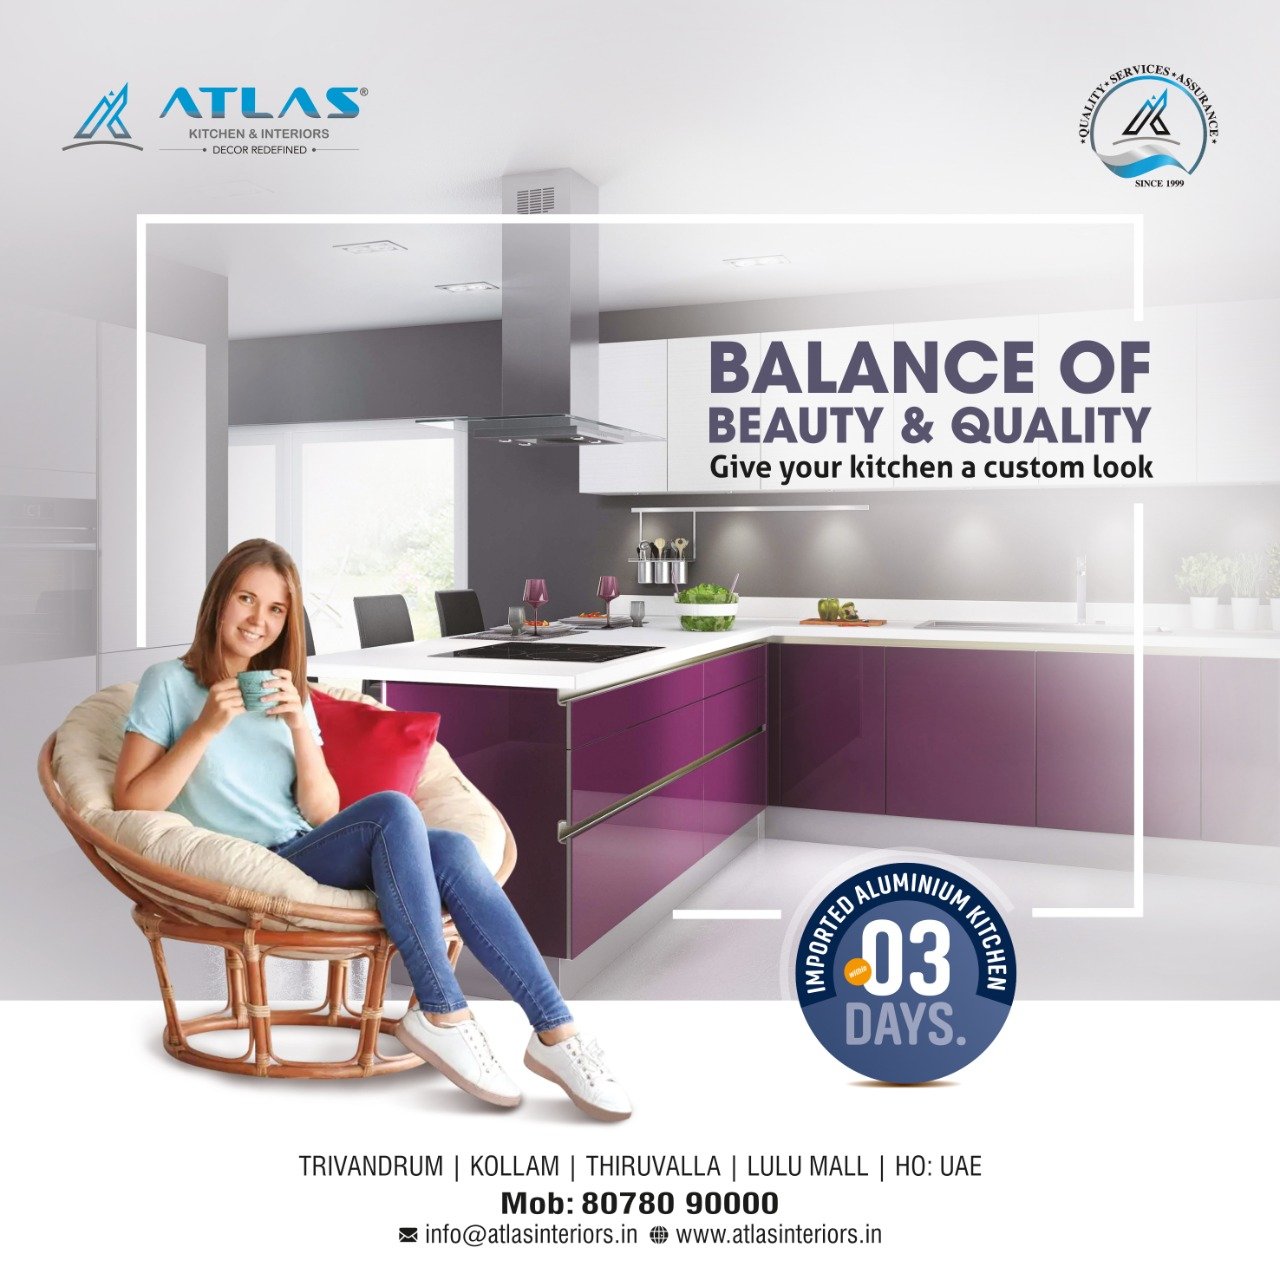 Transform and Revolutionize your Kitchen with Atlas Kitchen and Interior Experts.